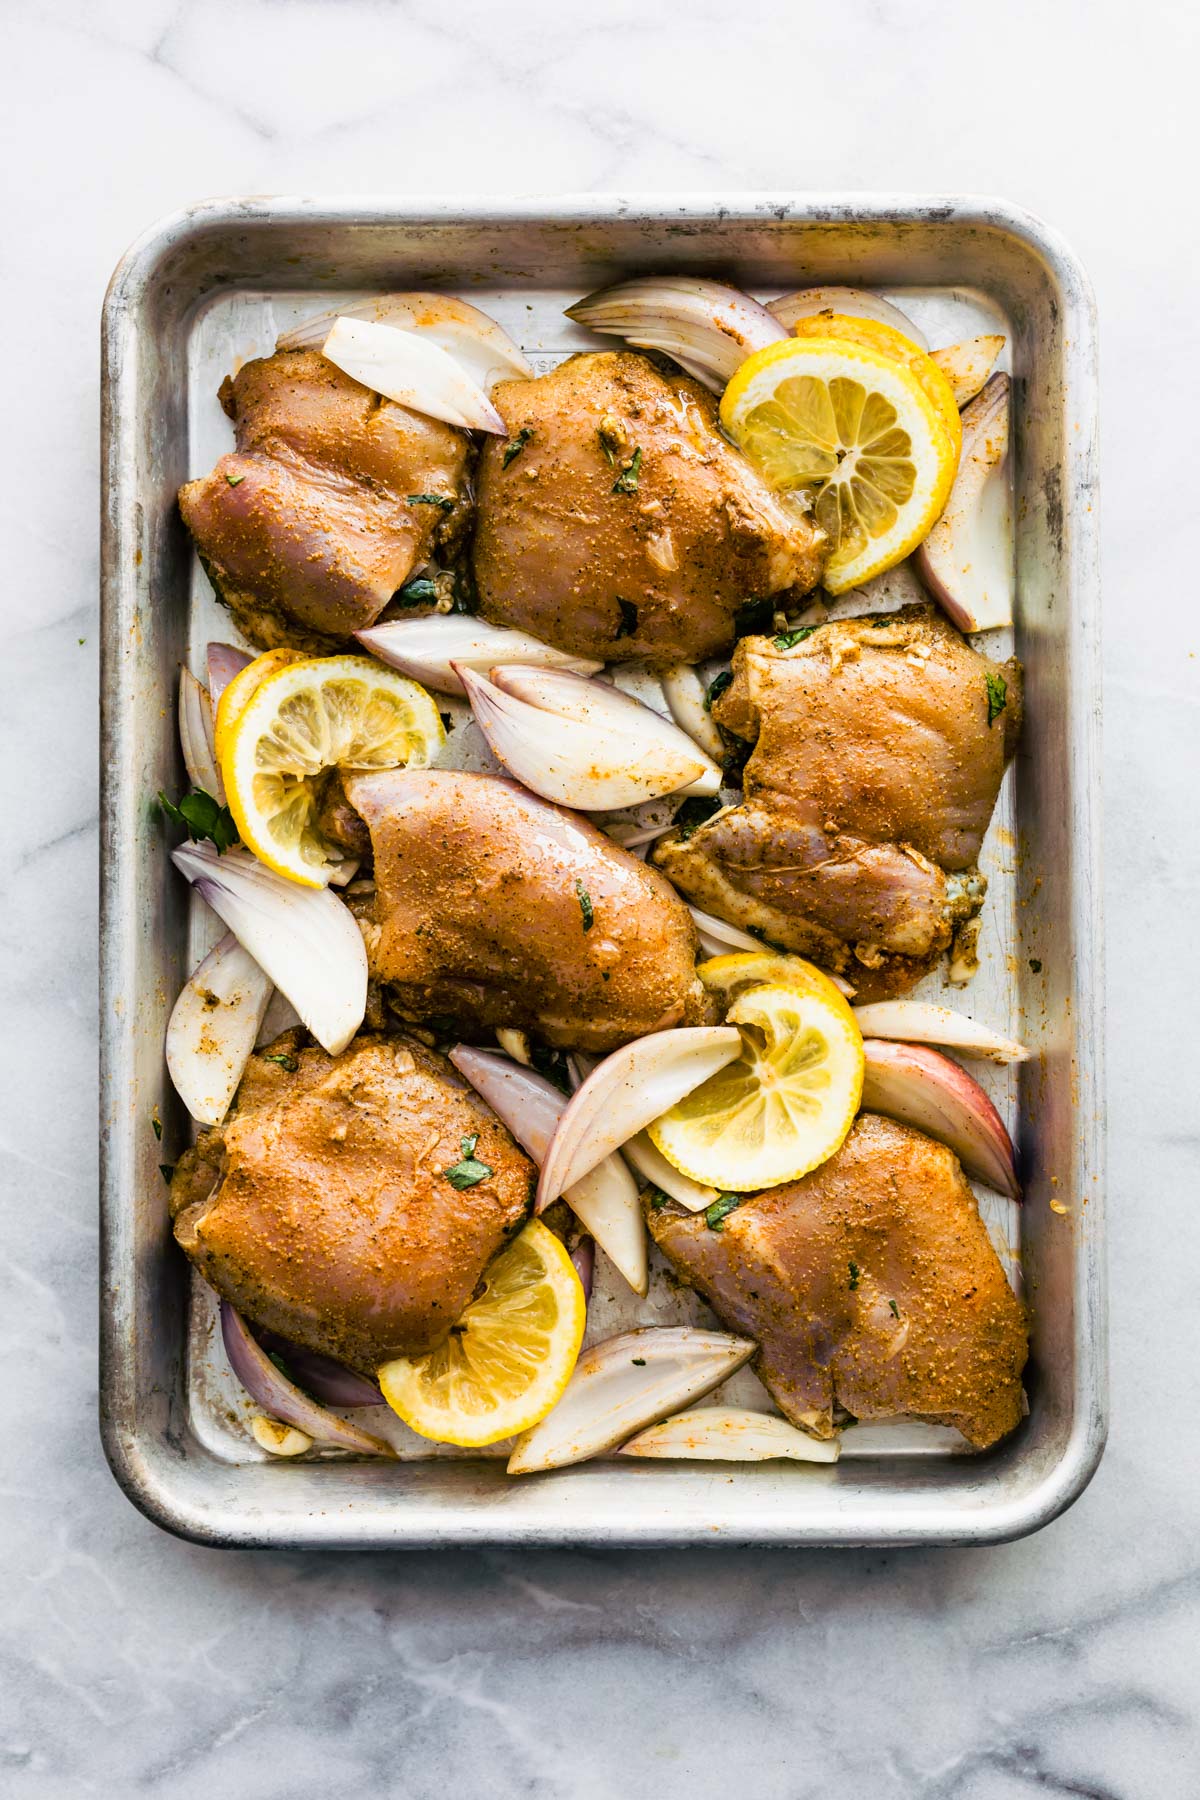 baked chicken thighs on sheet pan with slices of lemon and onions